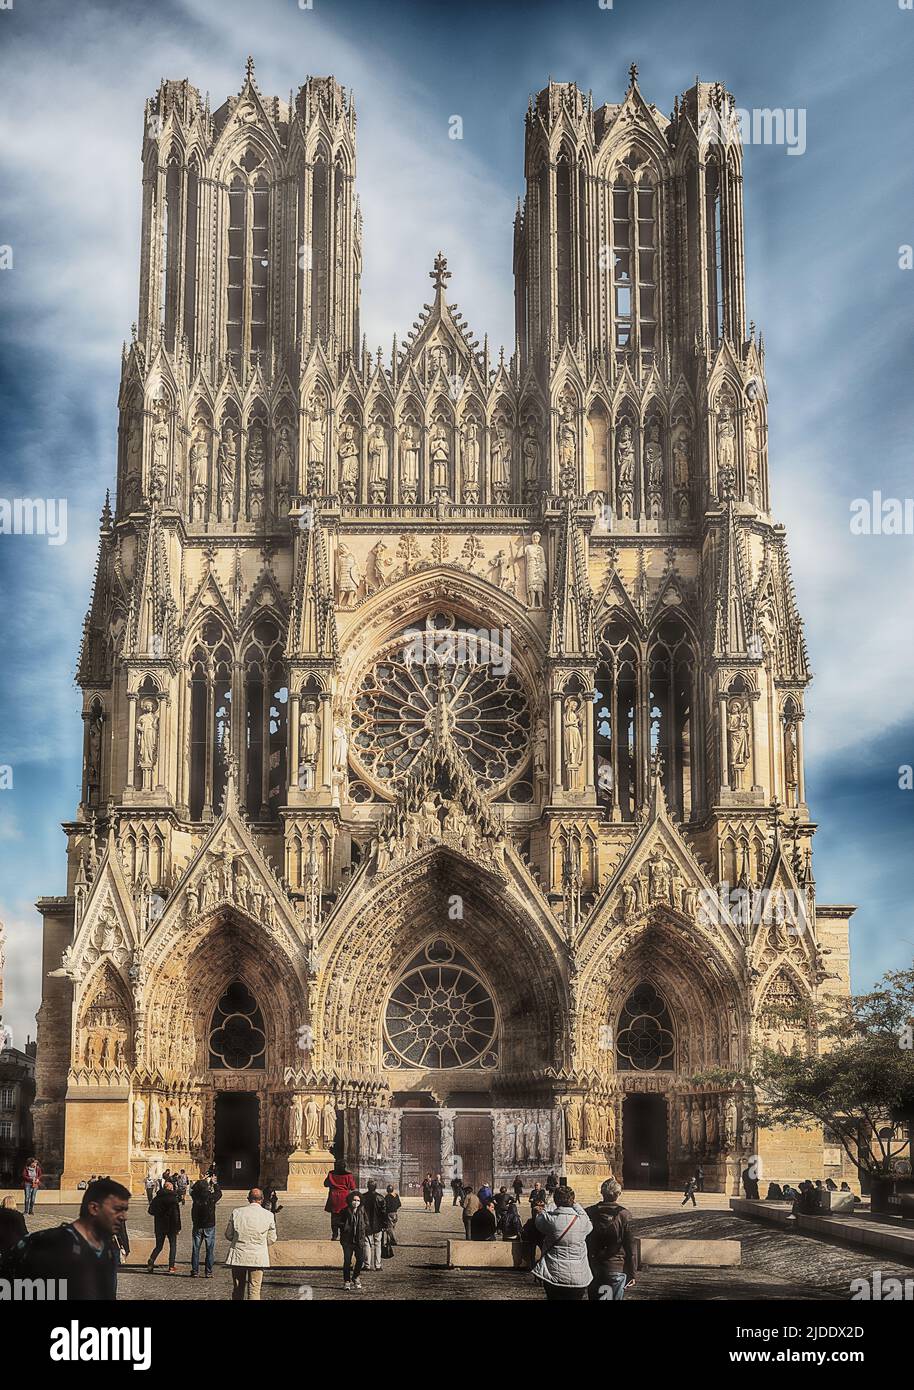 REIMS, FRANCE - OCTOBER 15, 2021: The imposing Gothic cathedral of Reims is a historic landmark as kings of France were coronated there. Stock Photo